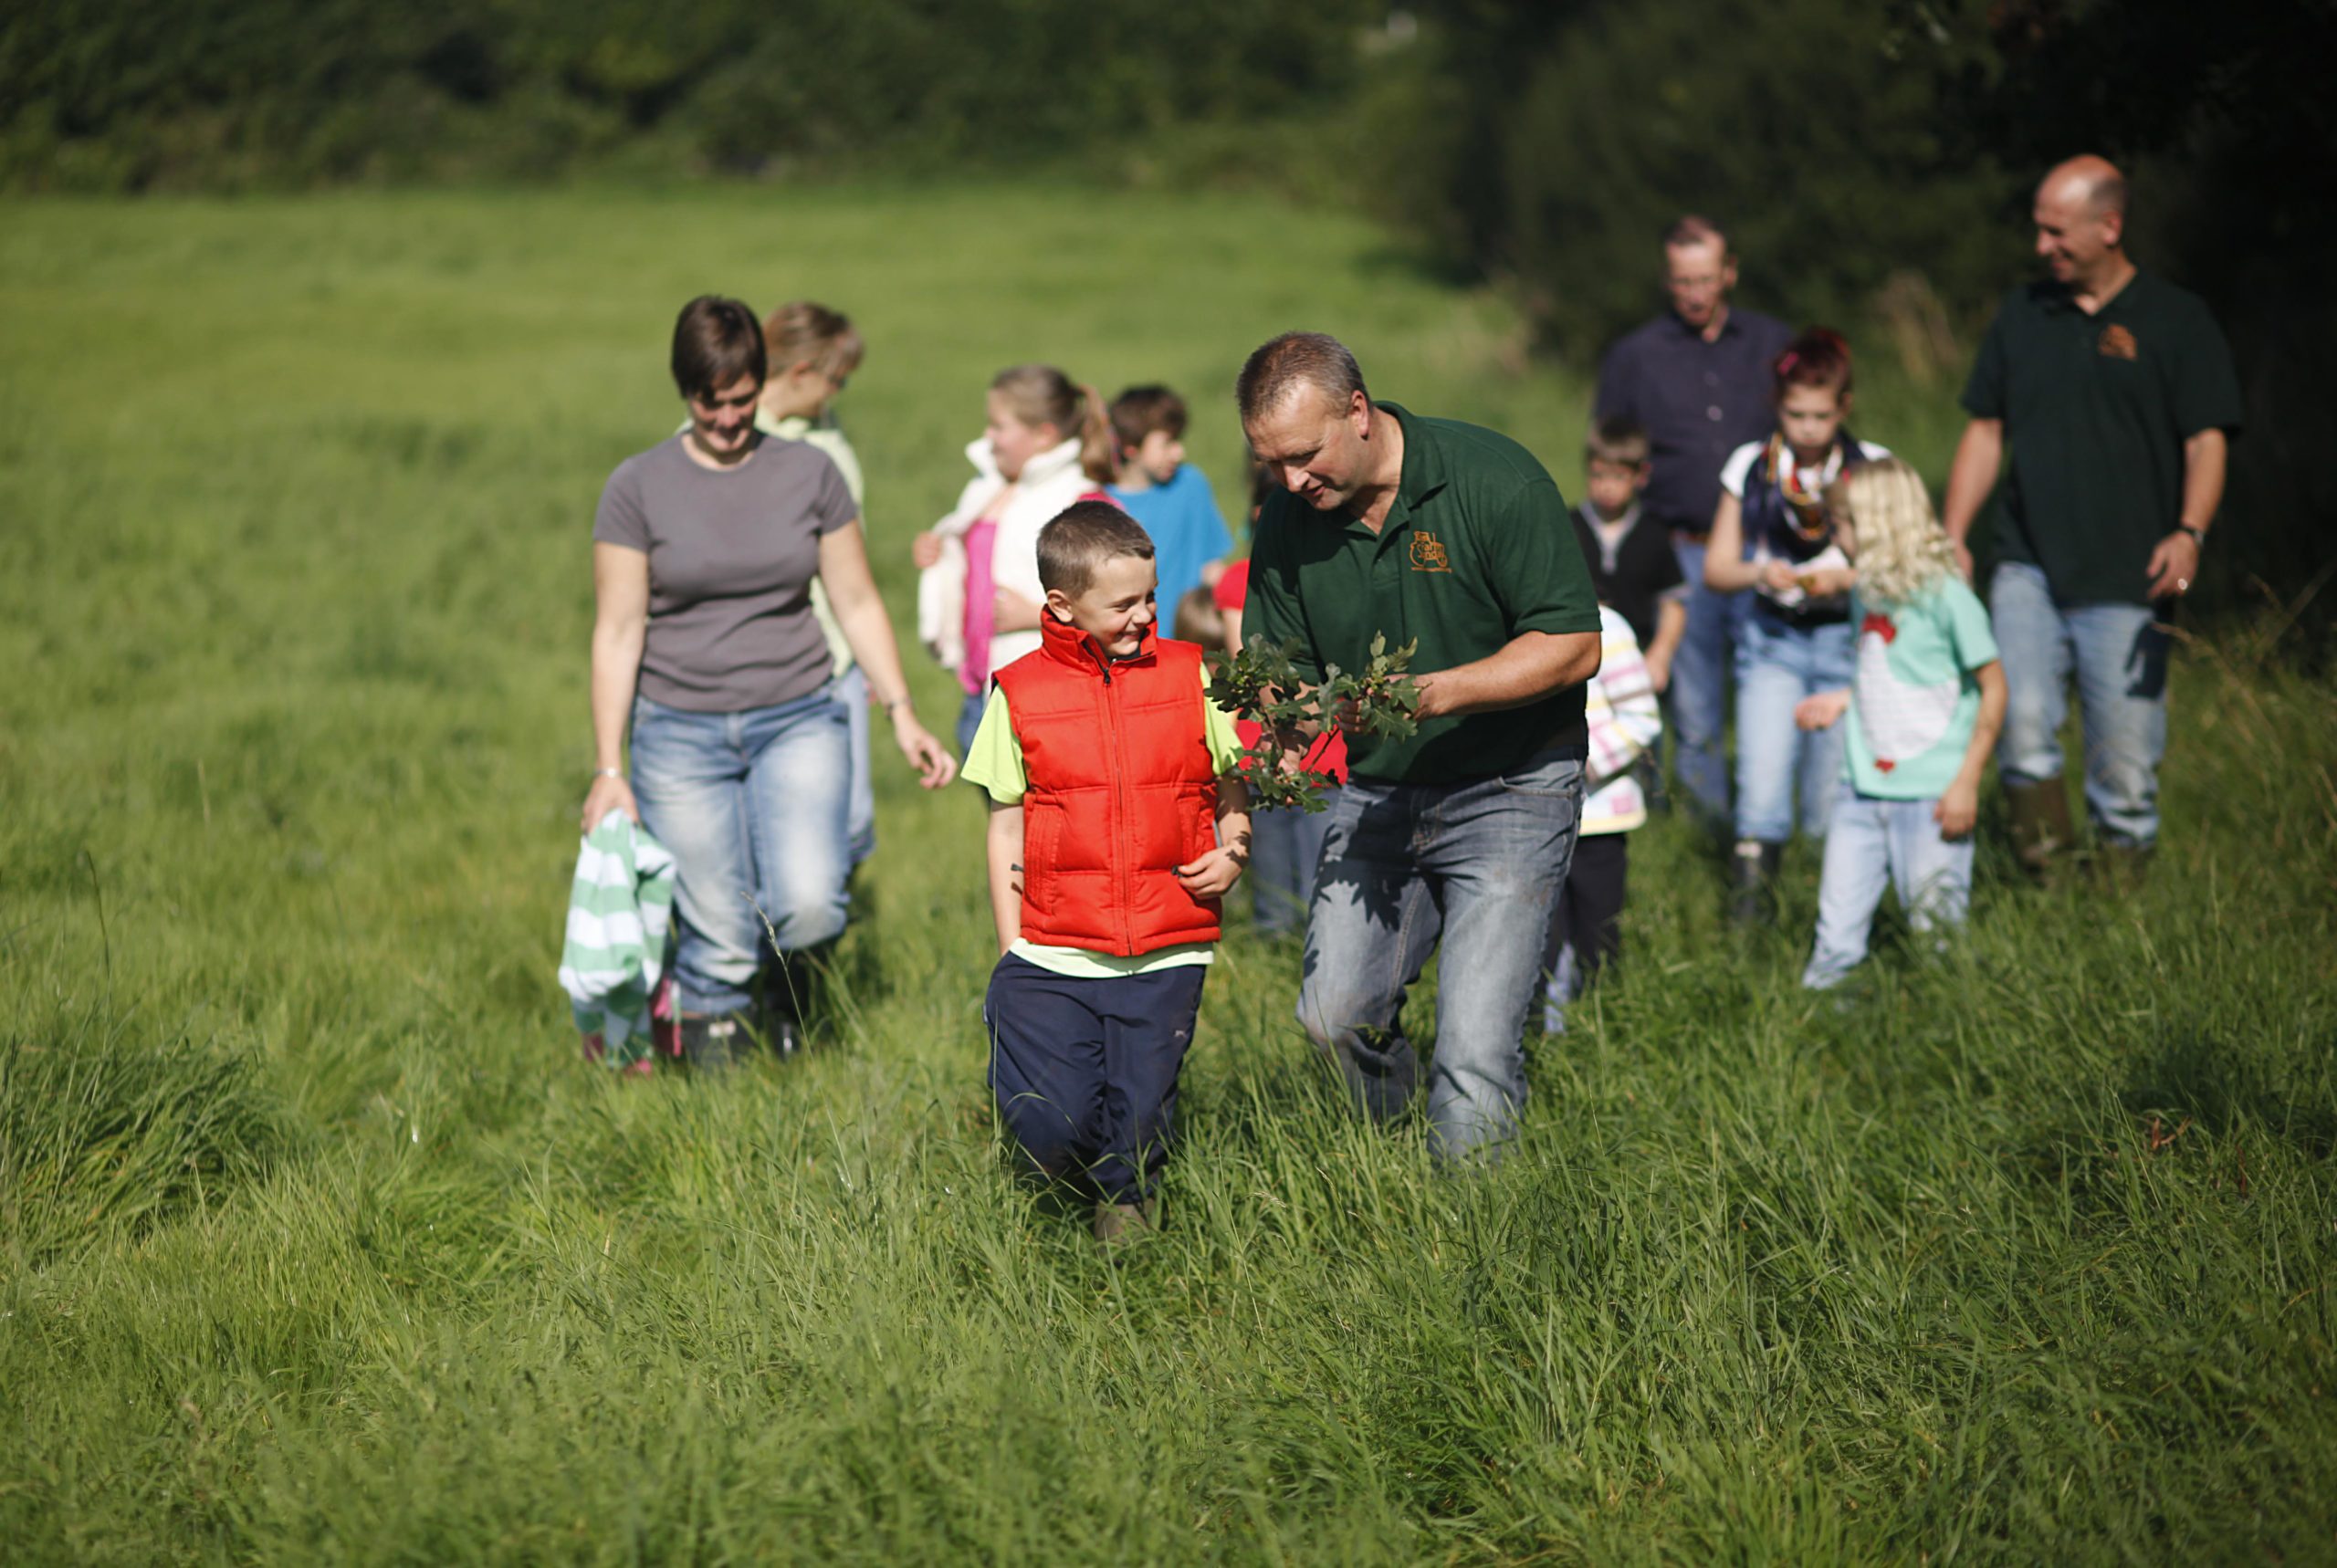 Entries can focus on any farm promotion, including  involvement in Open Farm Sunday.